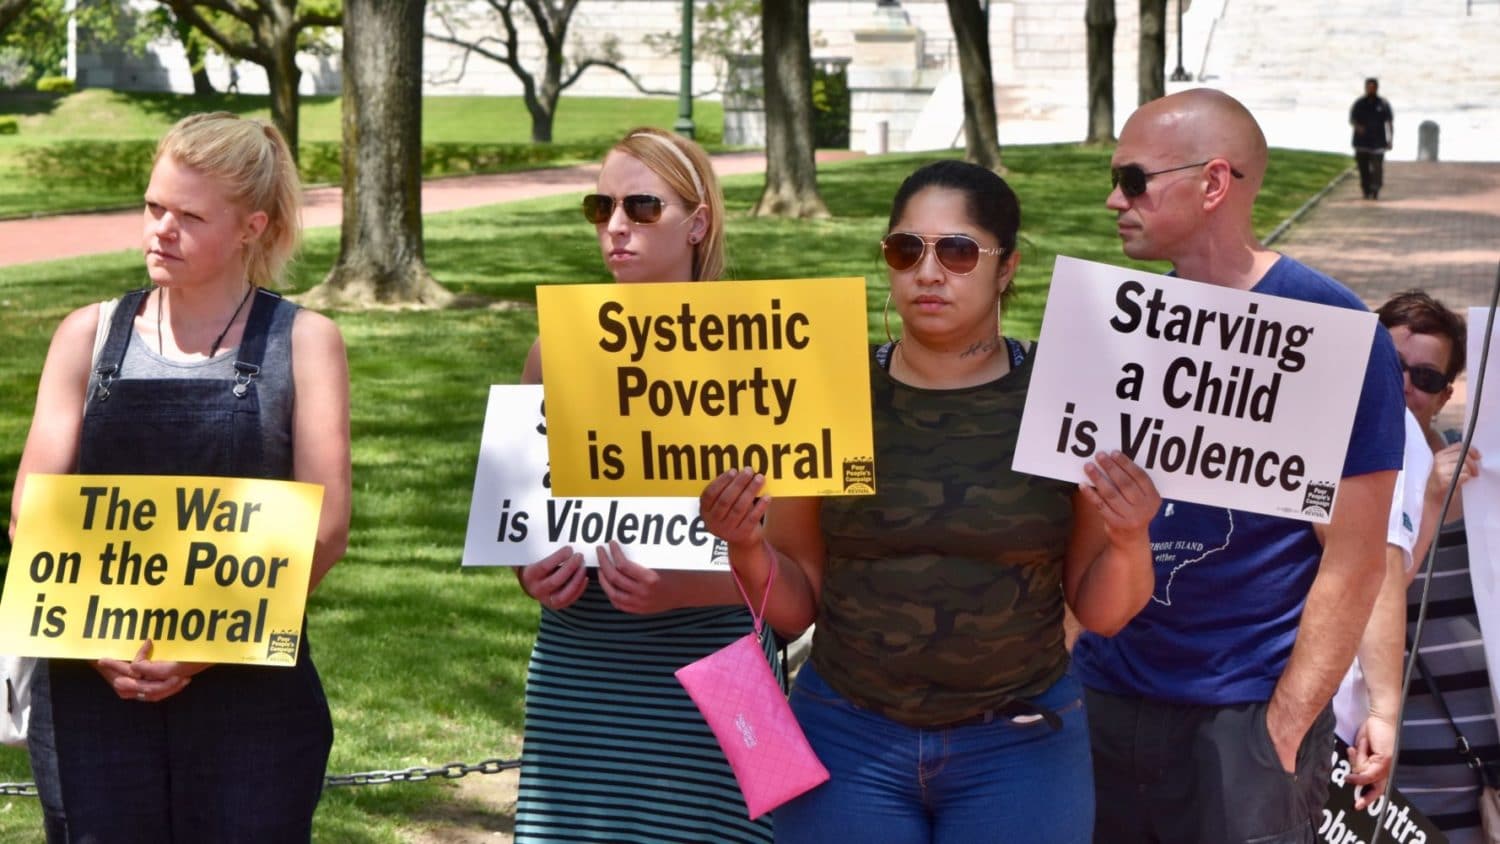 Rhode Island News: Week two of the Rhode Island Poor People’s Campaign takes on systemic racism and poverty